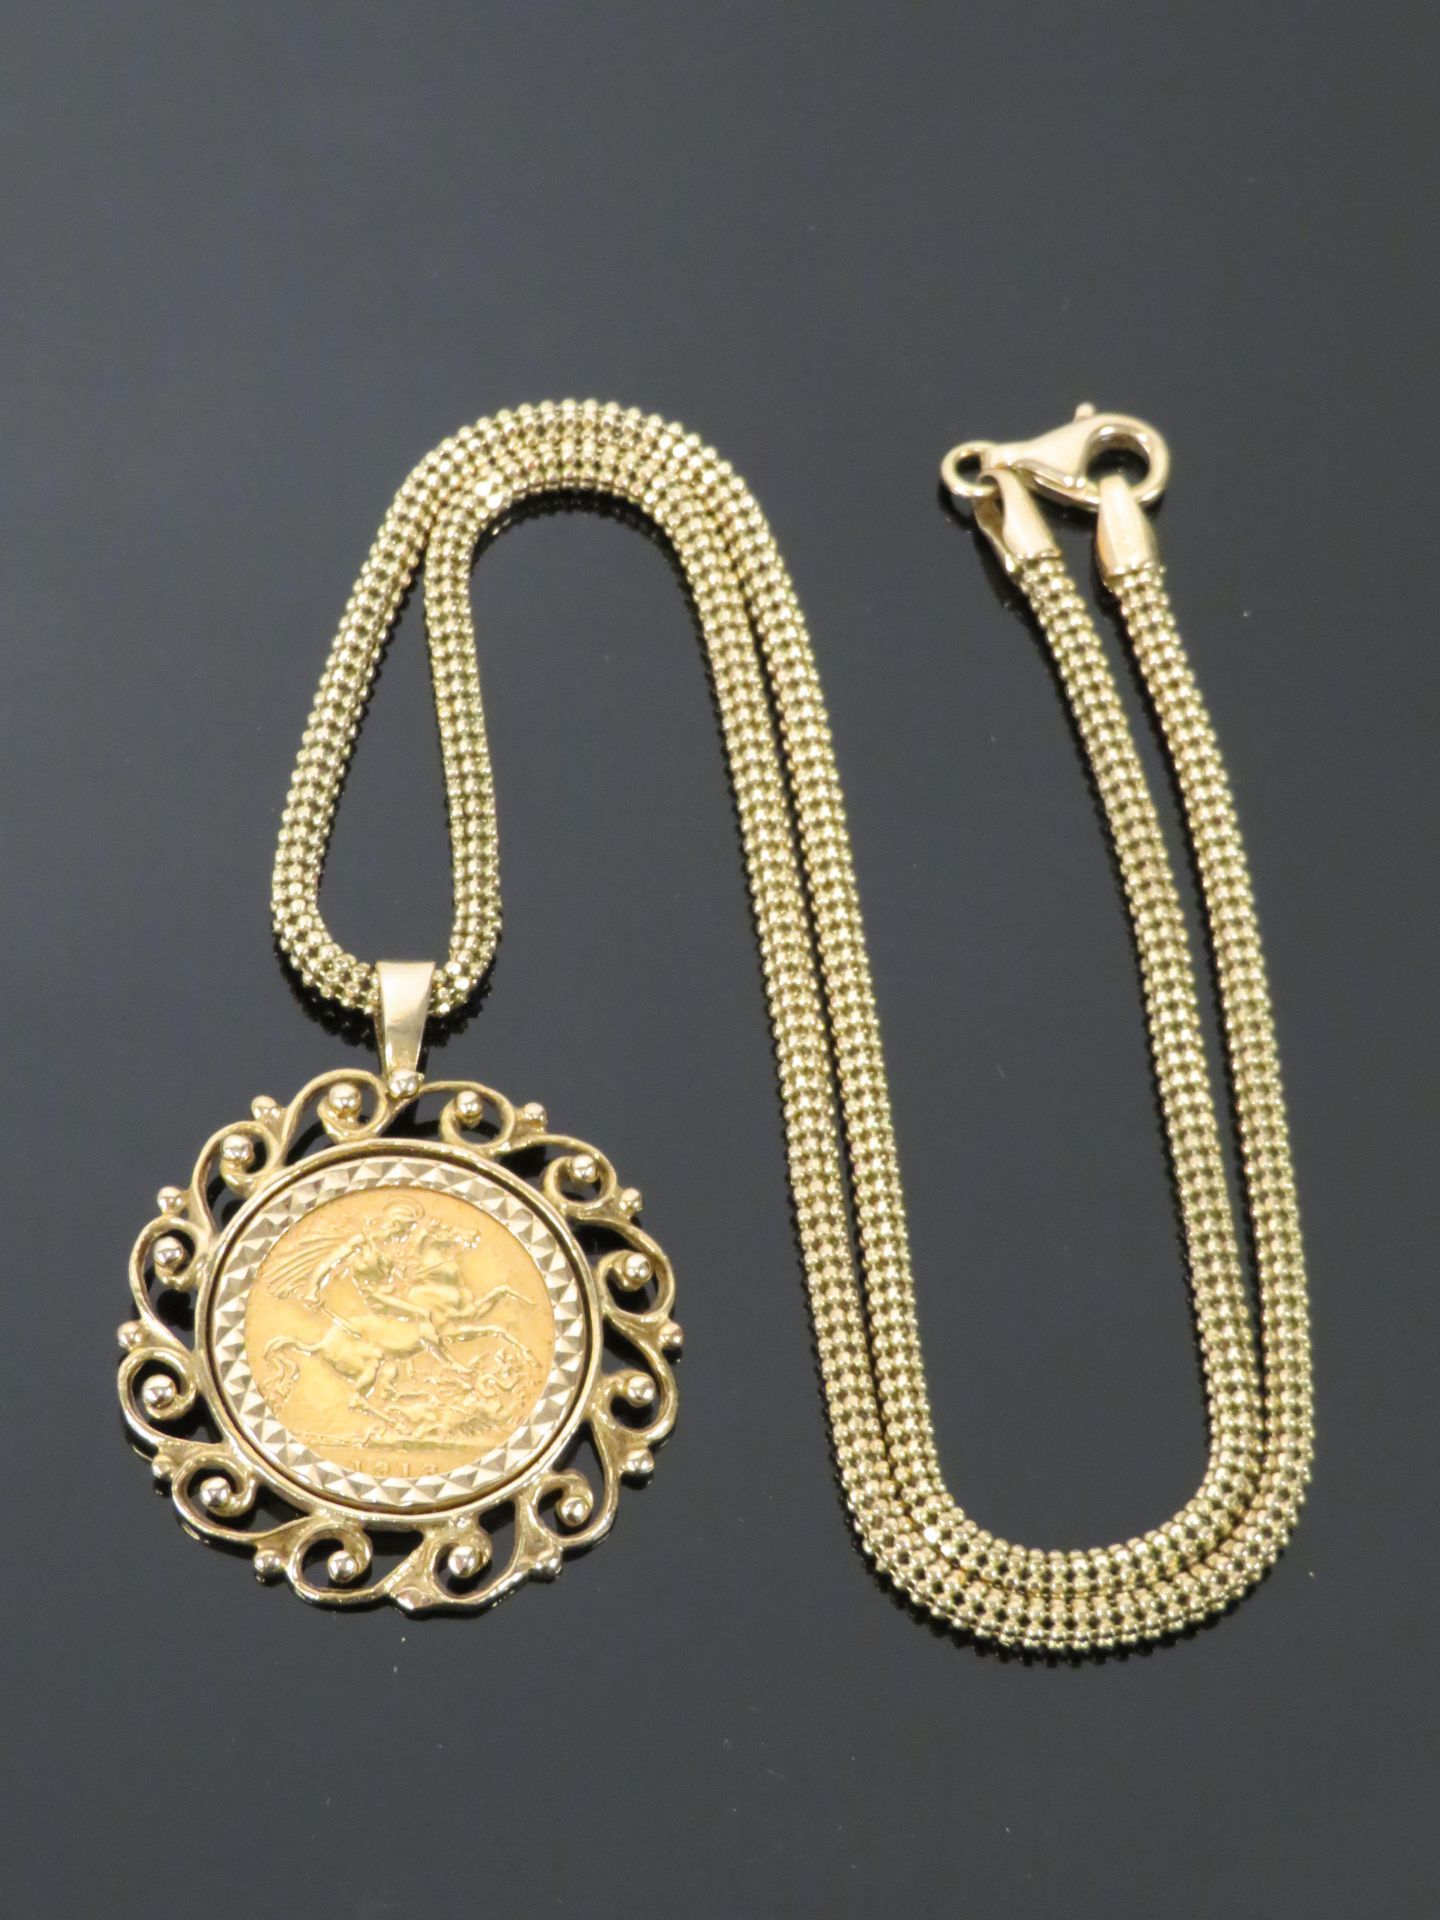 1913 Half Sovereign mounted on gold chain